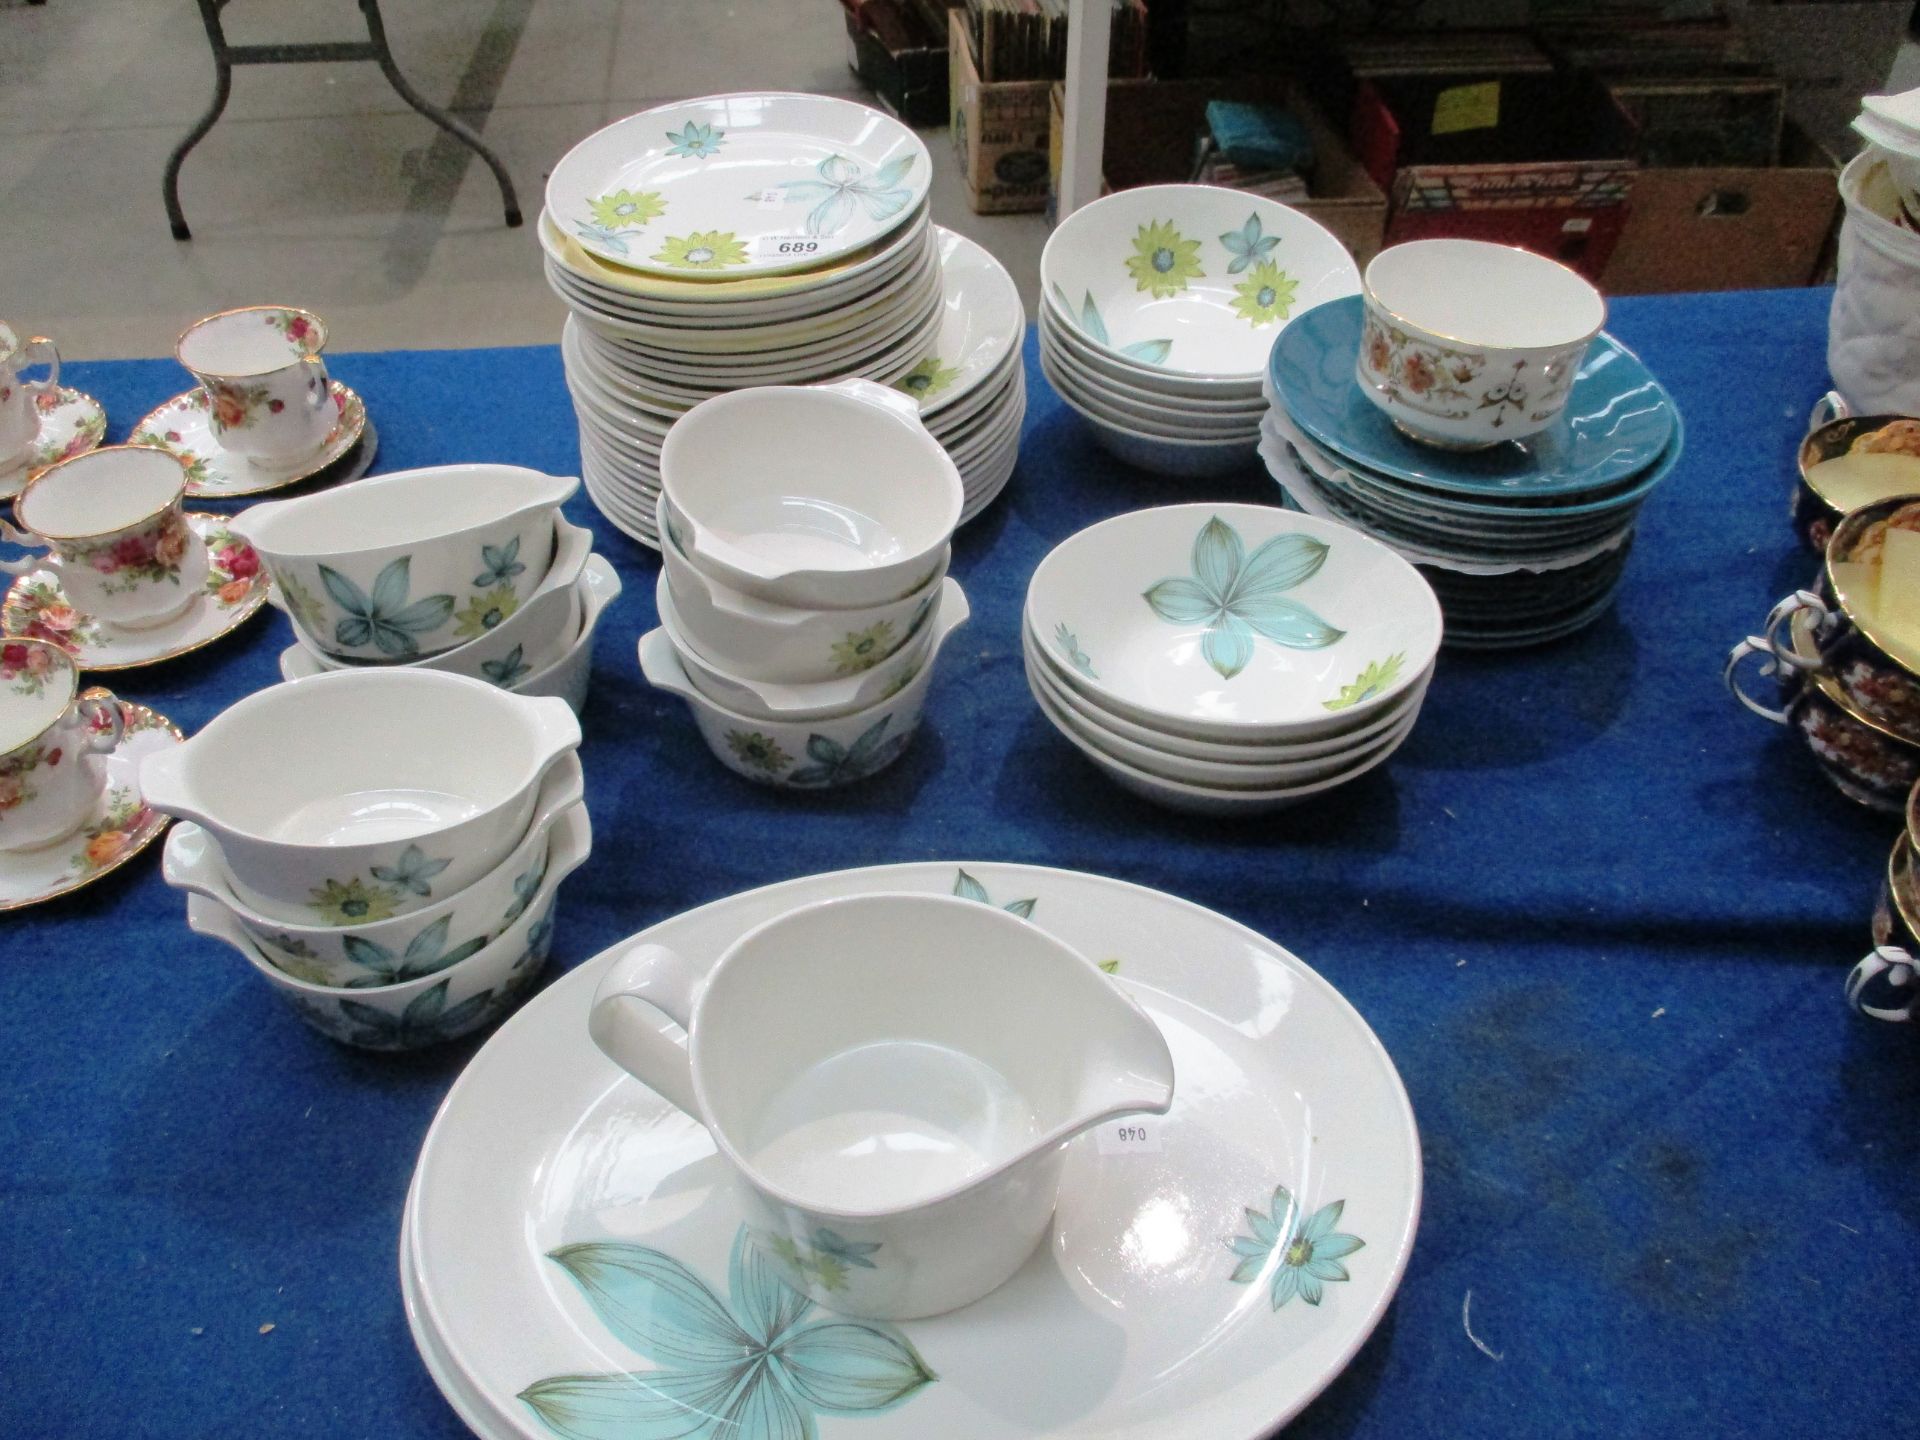 60 pieces of Johnson Bros 'Snow white' dinner service and a Royal Stafford Clovelly bowl (61)